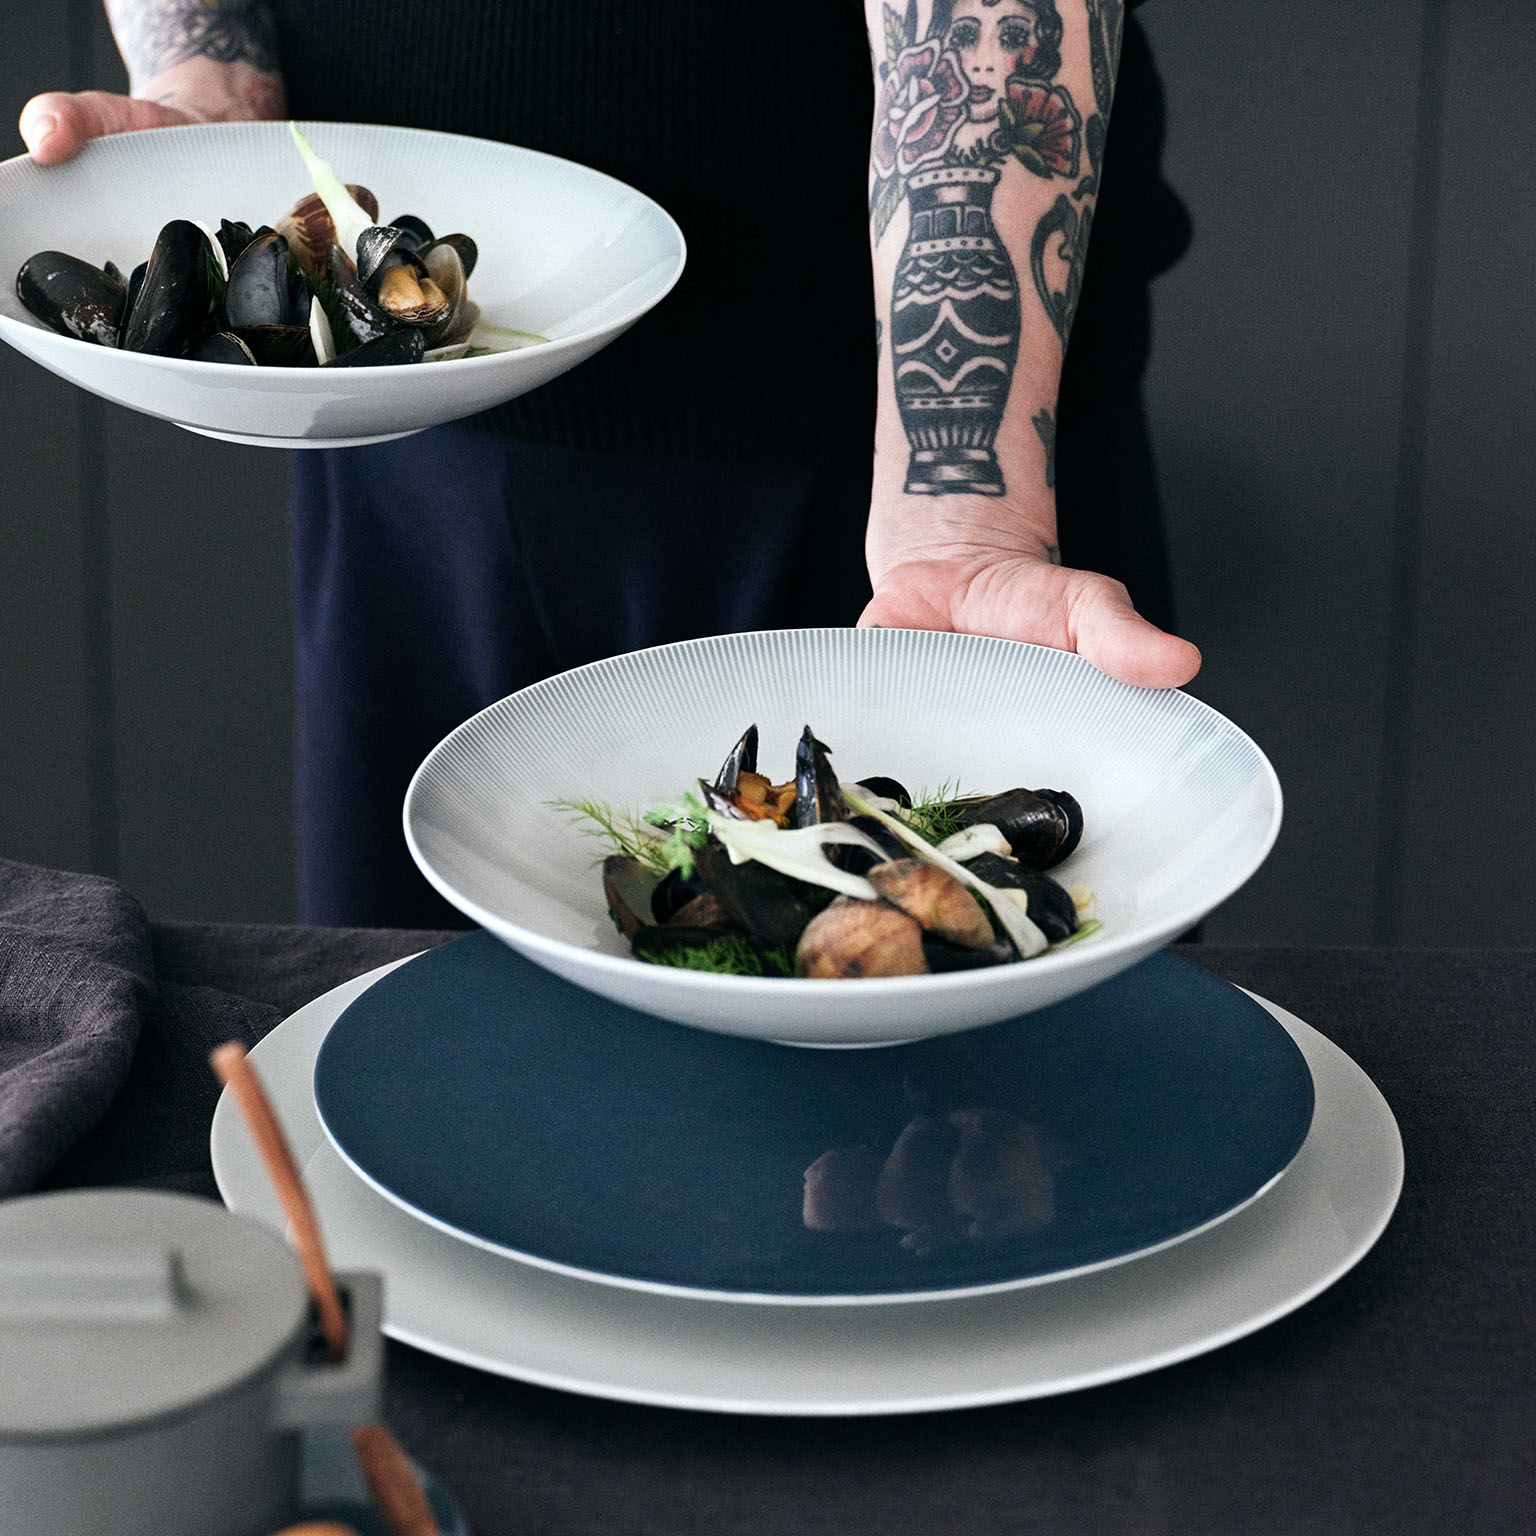 A person with tattoos on their arm serves a seafood dish with the relief soup plate from TAC Sensual.